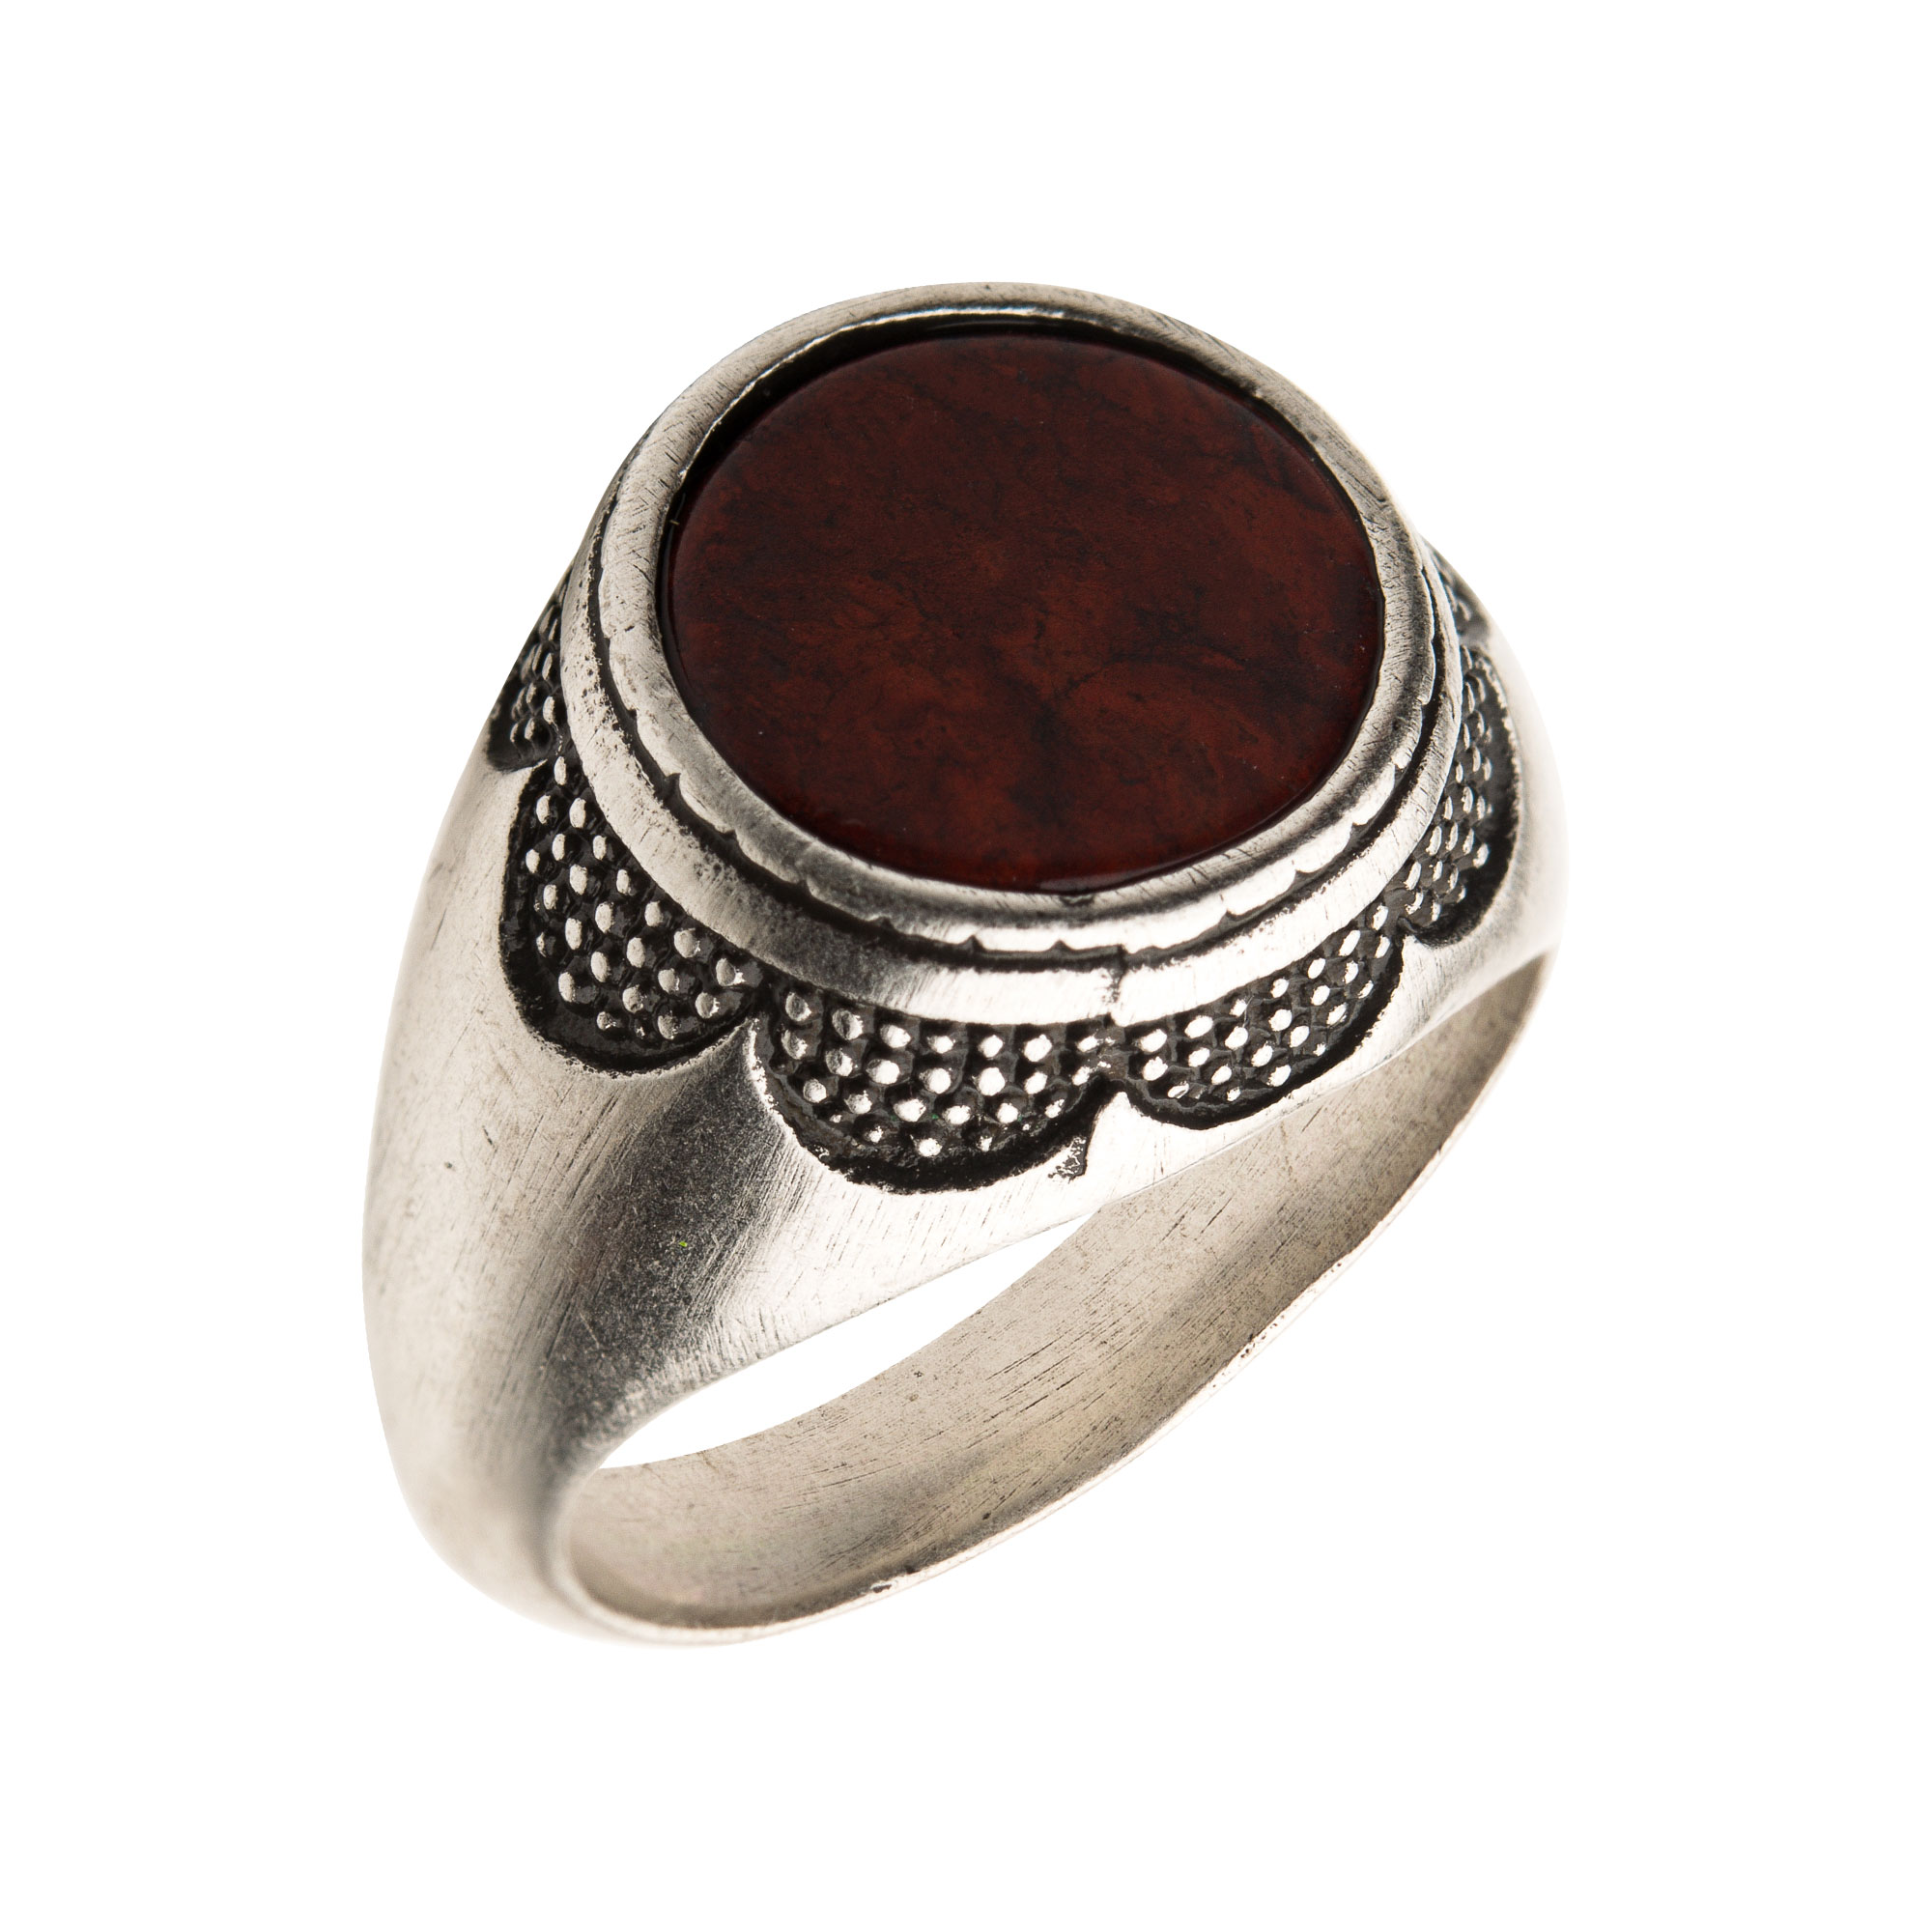 Stainless Steel Silver Plated with Red Jasper Stone Ring Lewis Jewelers, Inc. Ansonia, CT